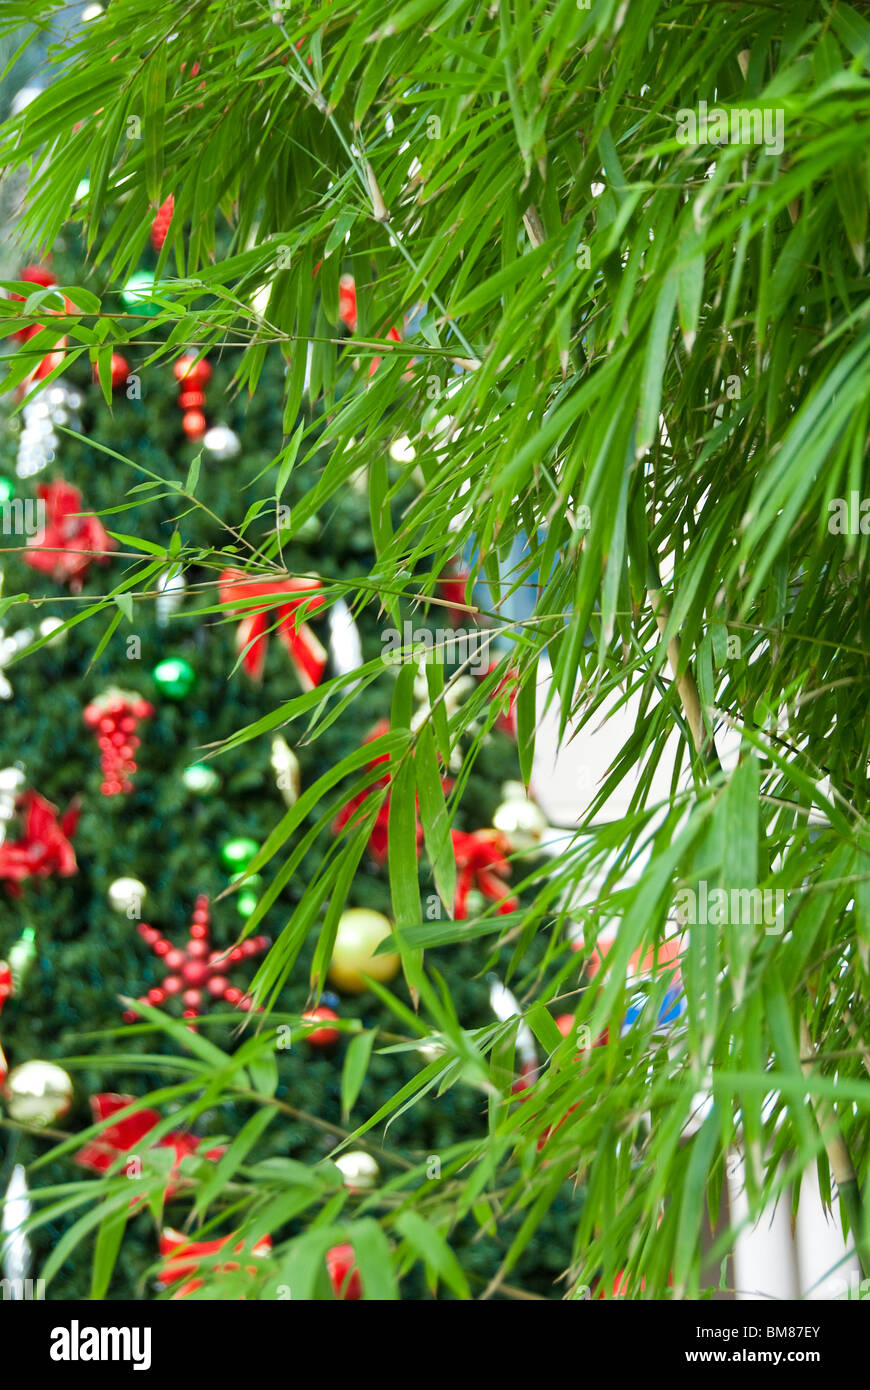 Exterior close-up of Christmas tree ornaments and bamboo landscaping on Las Olas Boulevard in Fort Lauderdale, Florida, USA Stock Photo